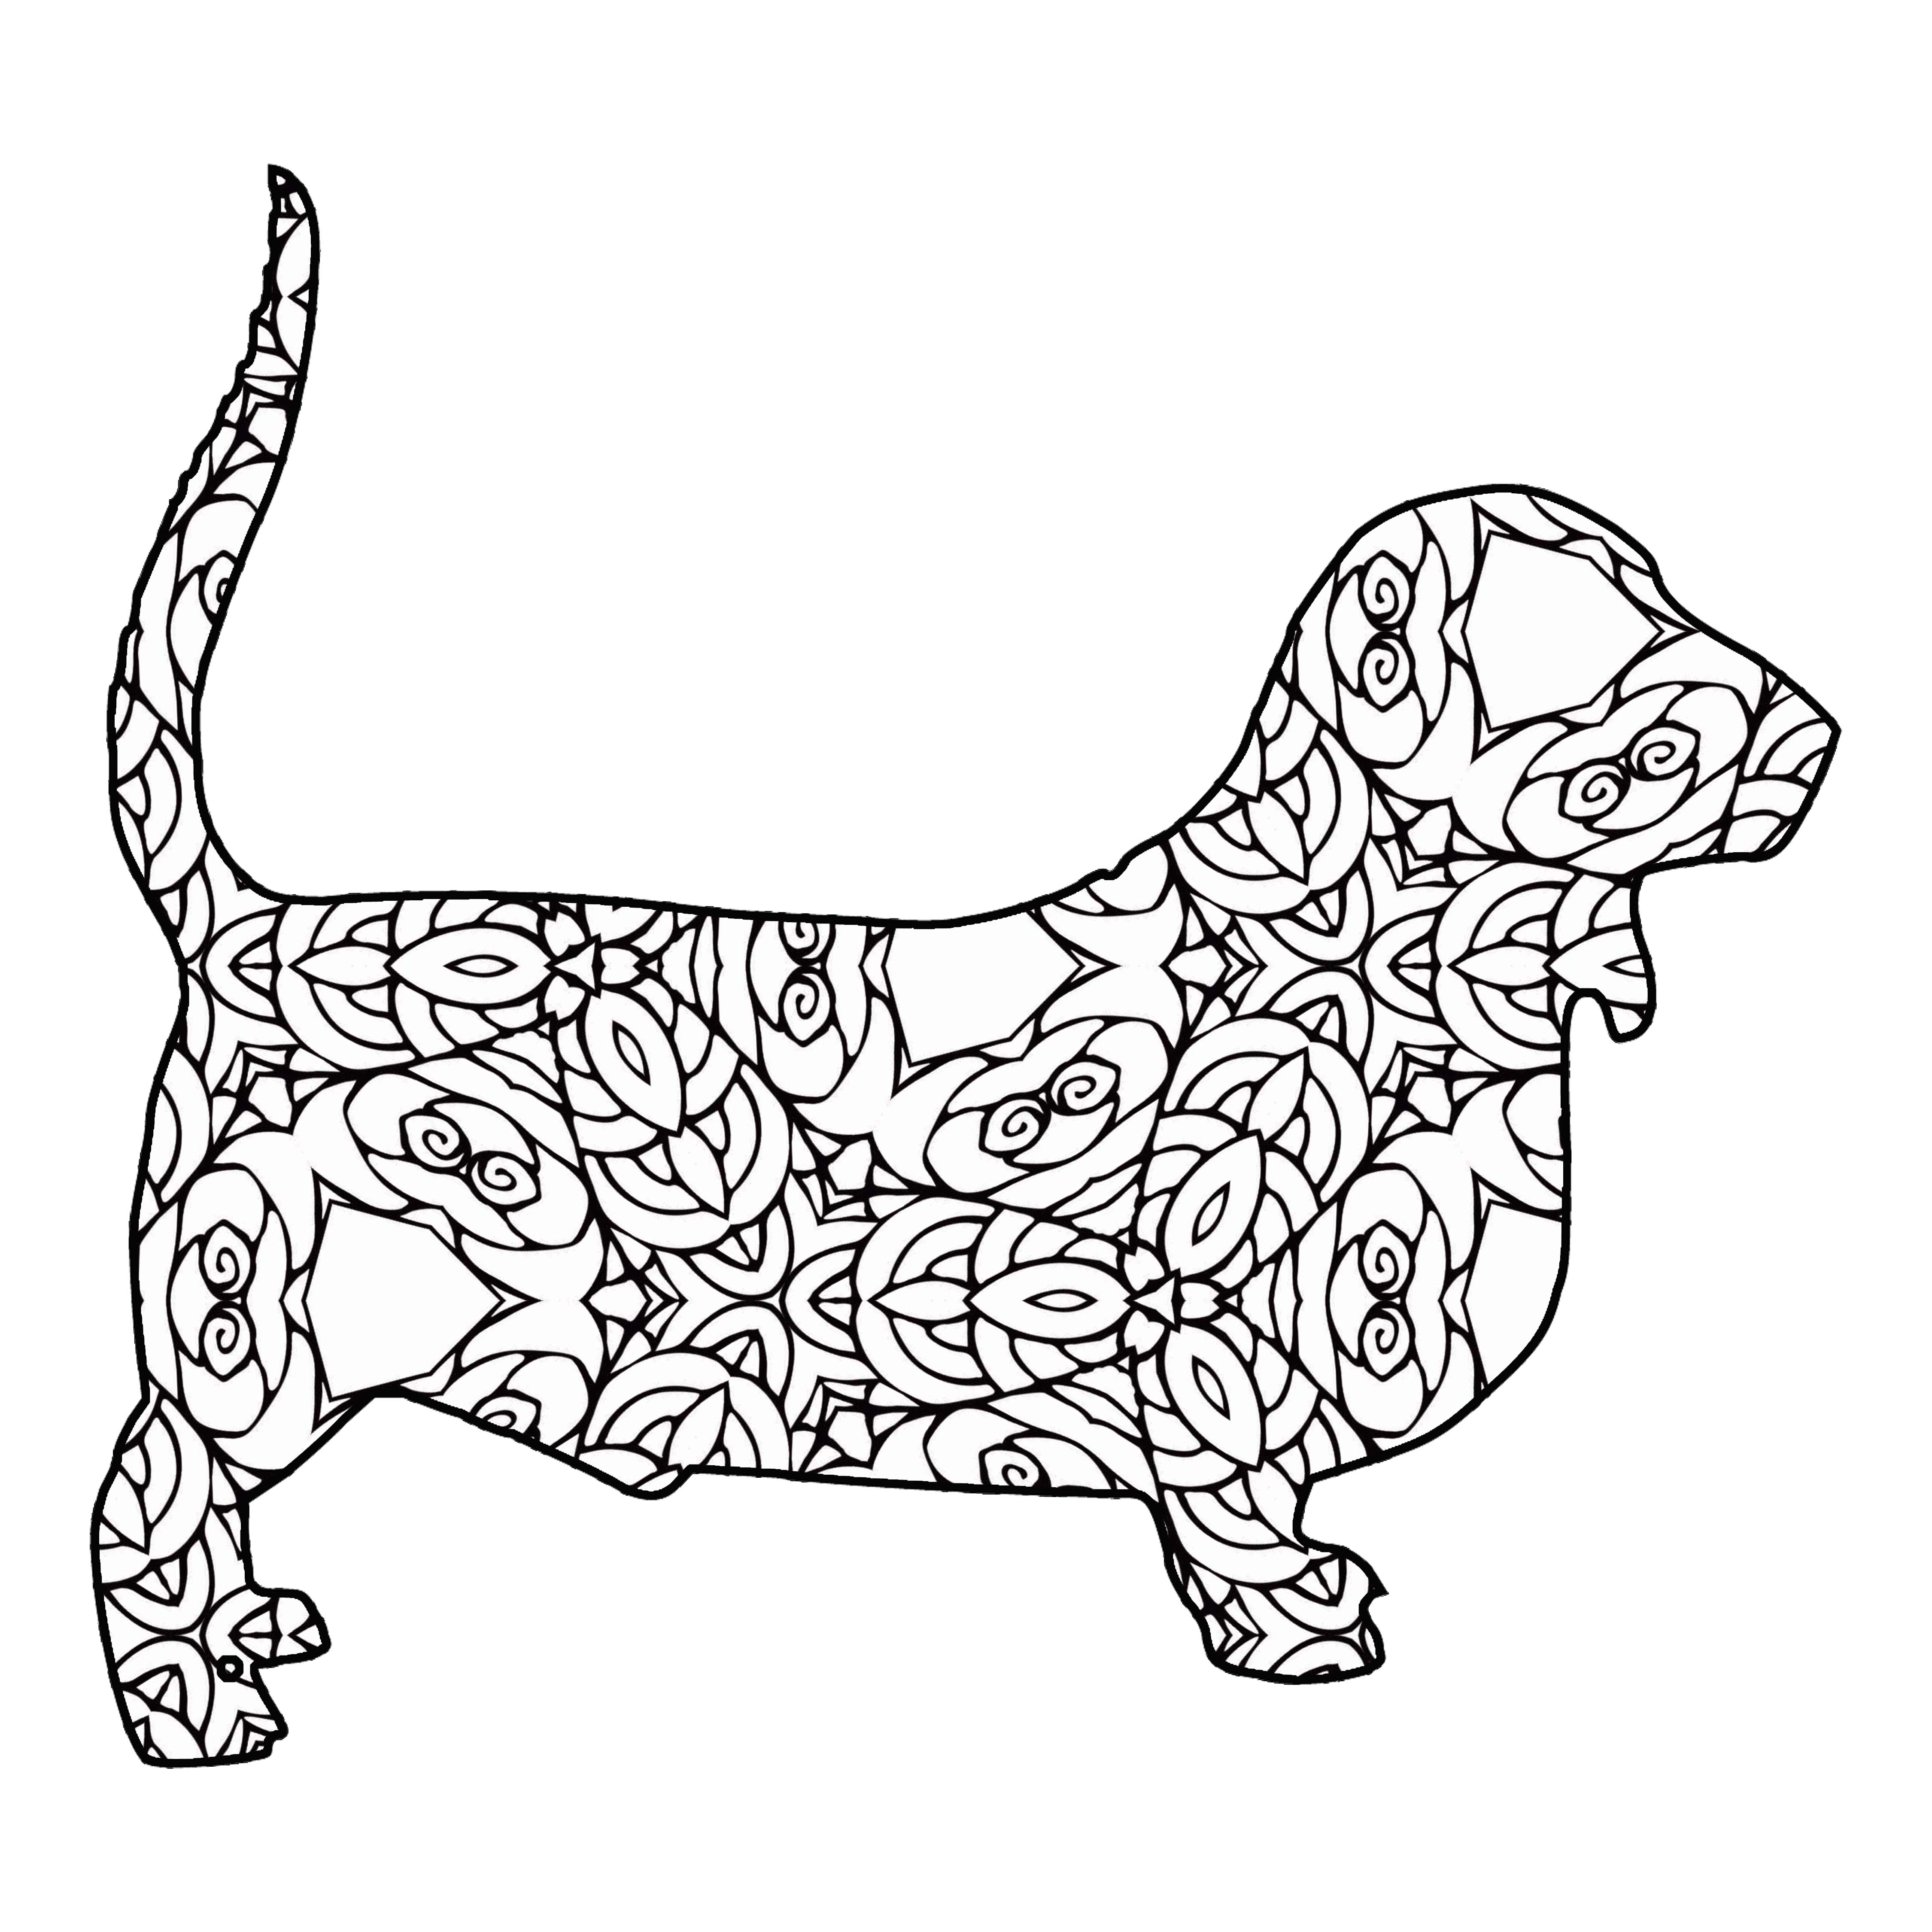 30 Free Coloring Pages A Geometric Animal Coloring Book Just for You